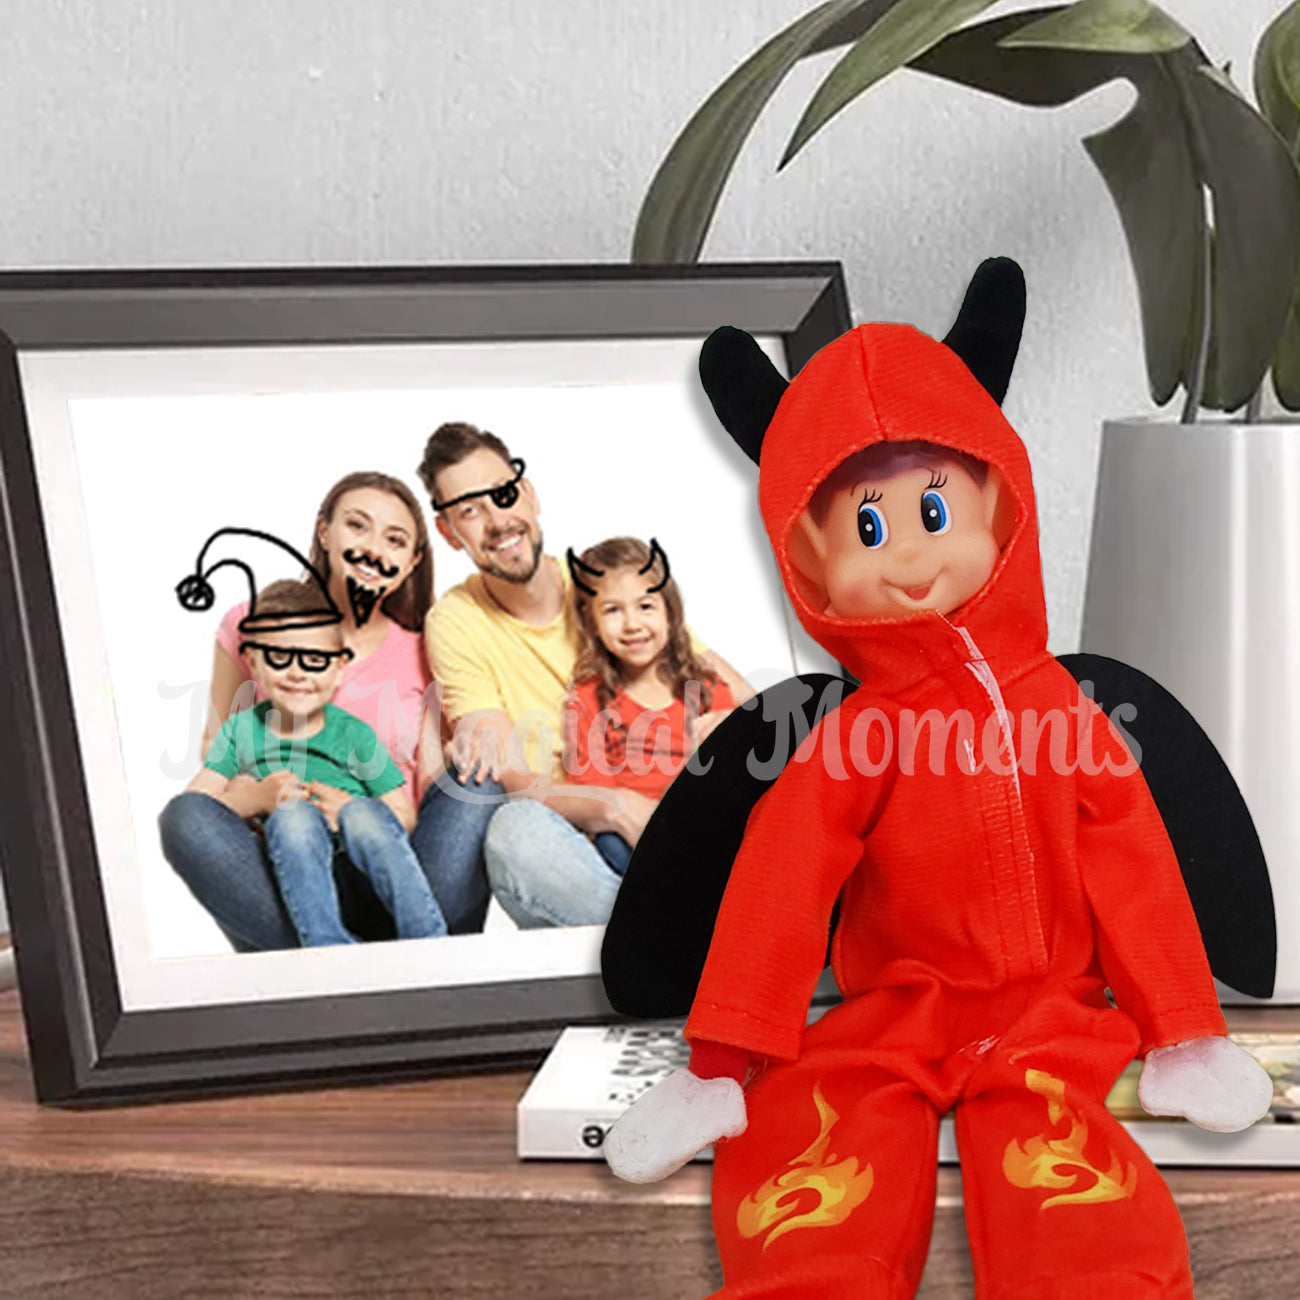 Devil Elf outfit worn by elves behavin badly drawing on family portrait